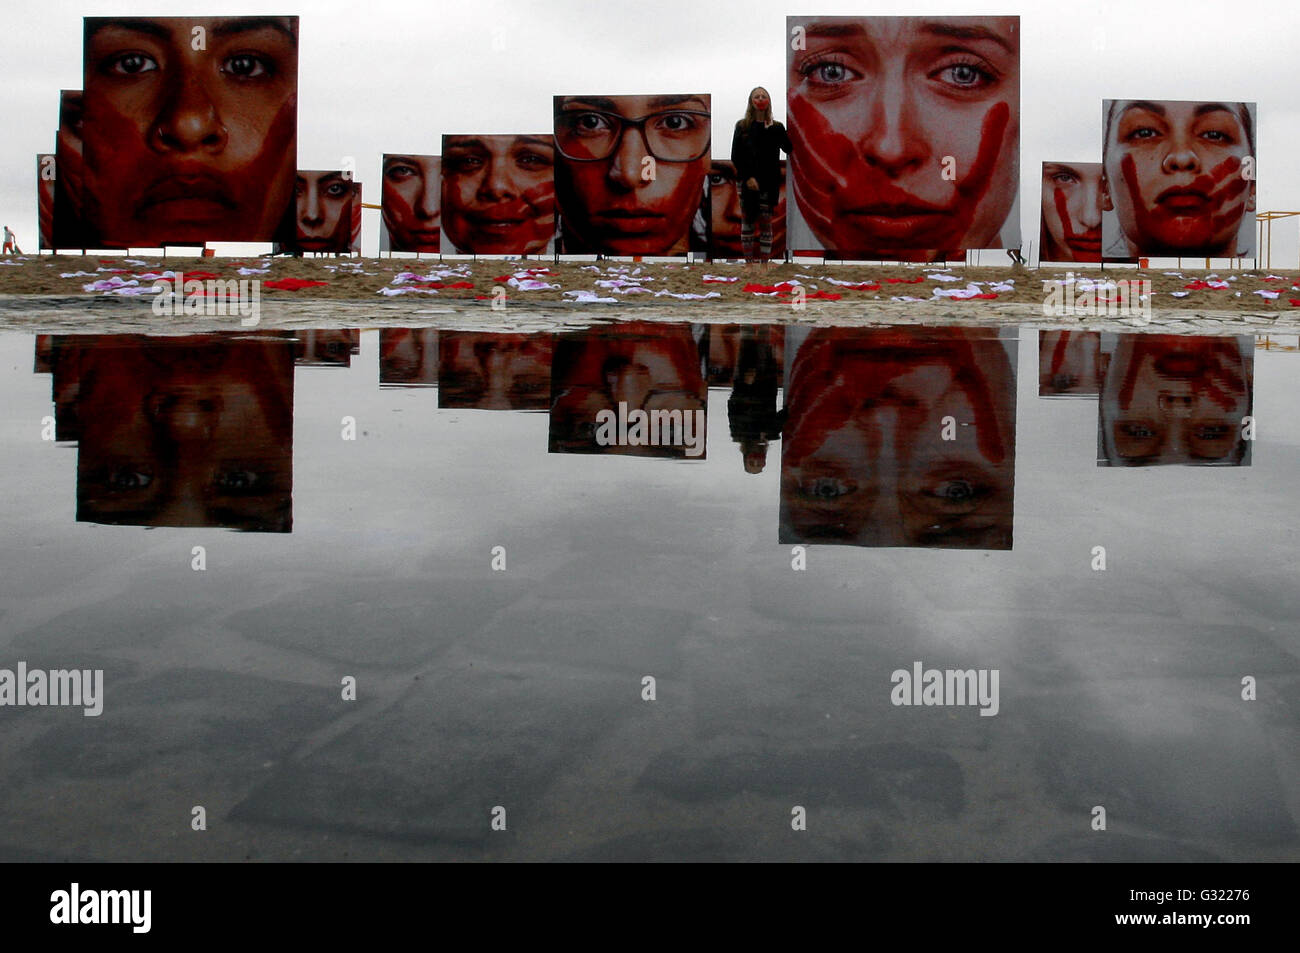 Rio De Janeiro, Brazil. 6th June, 2016. A woman poses in front of images of women displayed during a protest against the abuses to women, at Copacabana Beach, in Rio de Janeiro, Brazil, on June 6, 2016. Credit:  Severino Silva/AGENCIA ESTADO/Xinhua/Alamy Live News Stock Photo